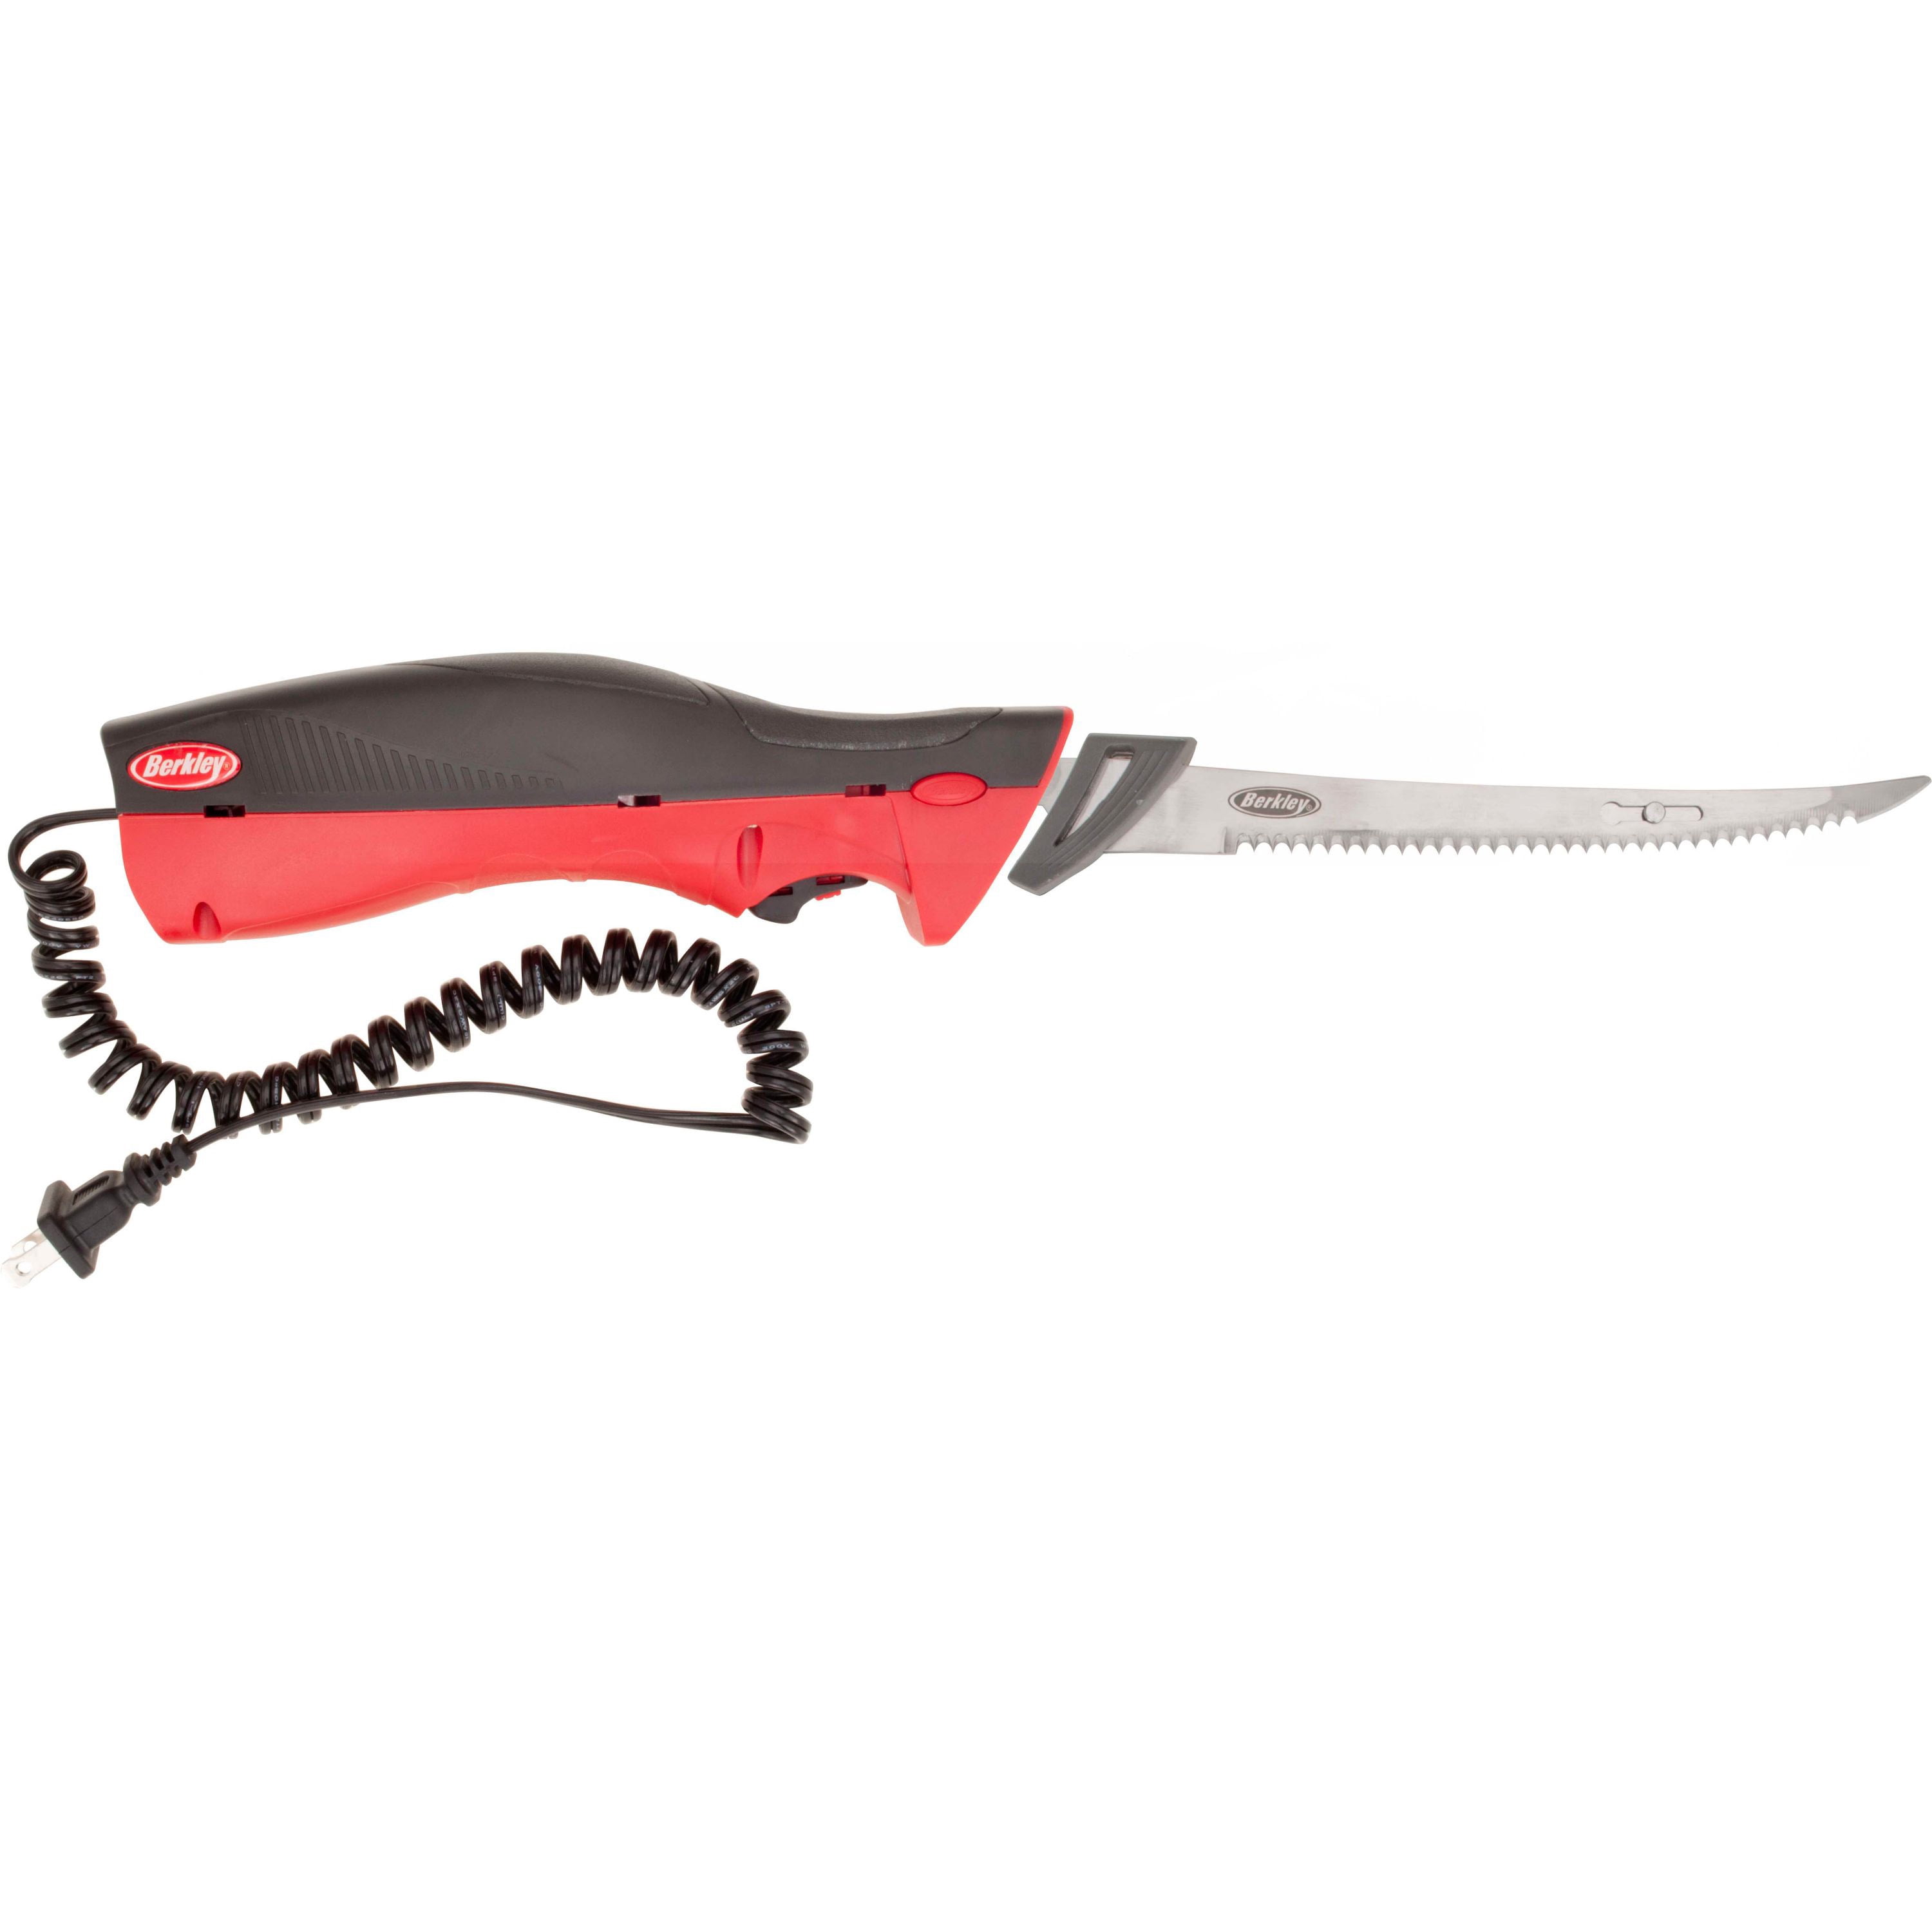  Mershca Cordless Electric Fillet Knife, with 8in